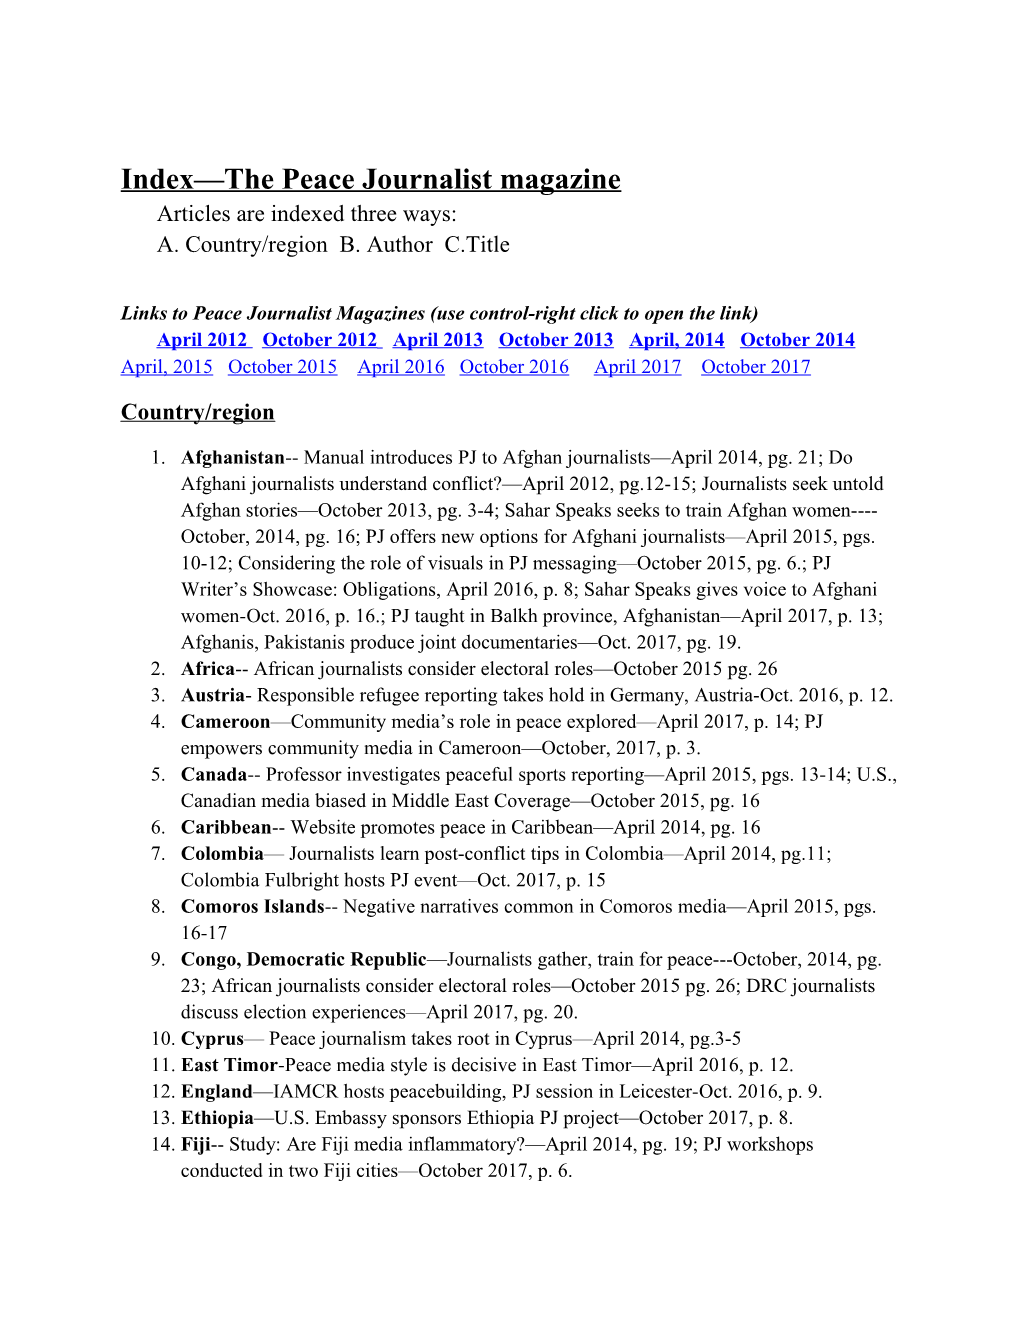 Index the Peace Journalist Magazinearticles Are Indexed Three Ways: A. Country/Region B